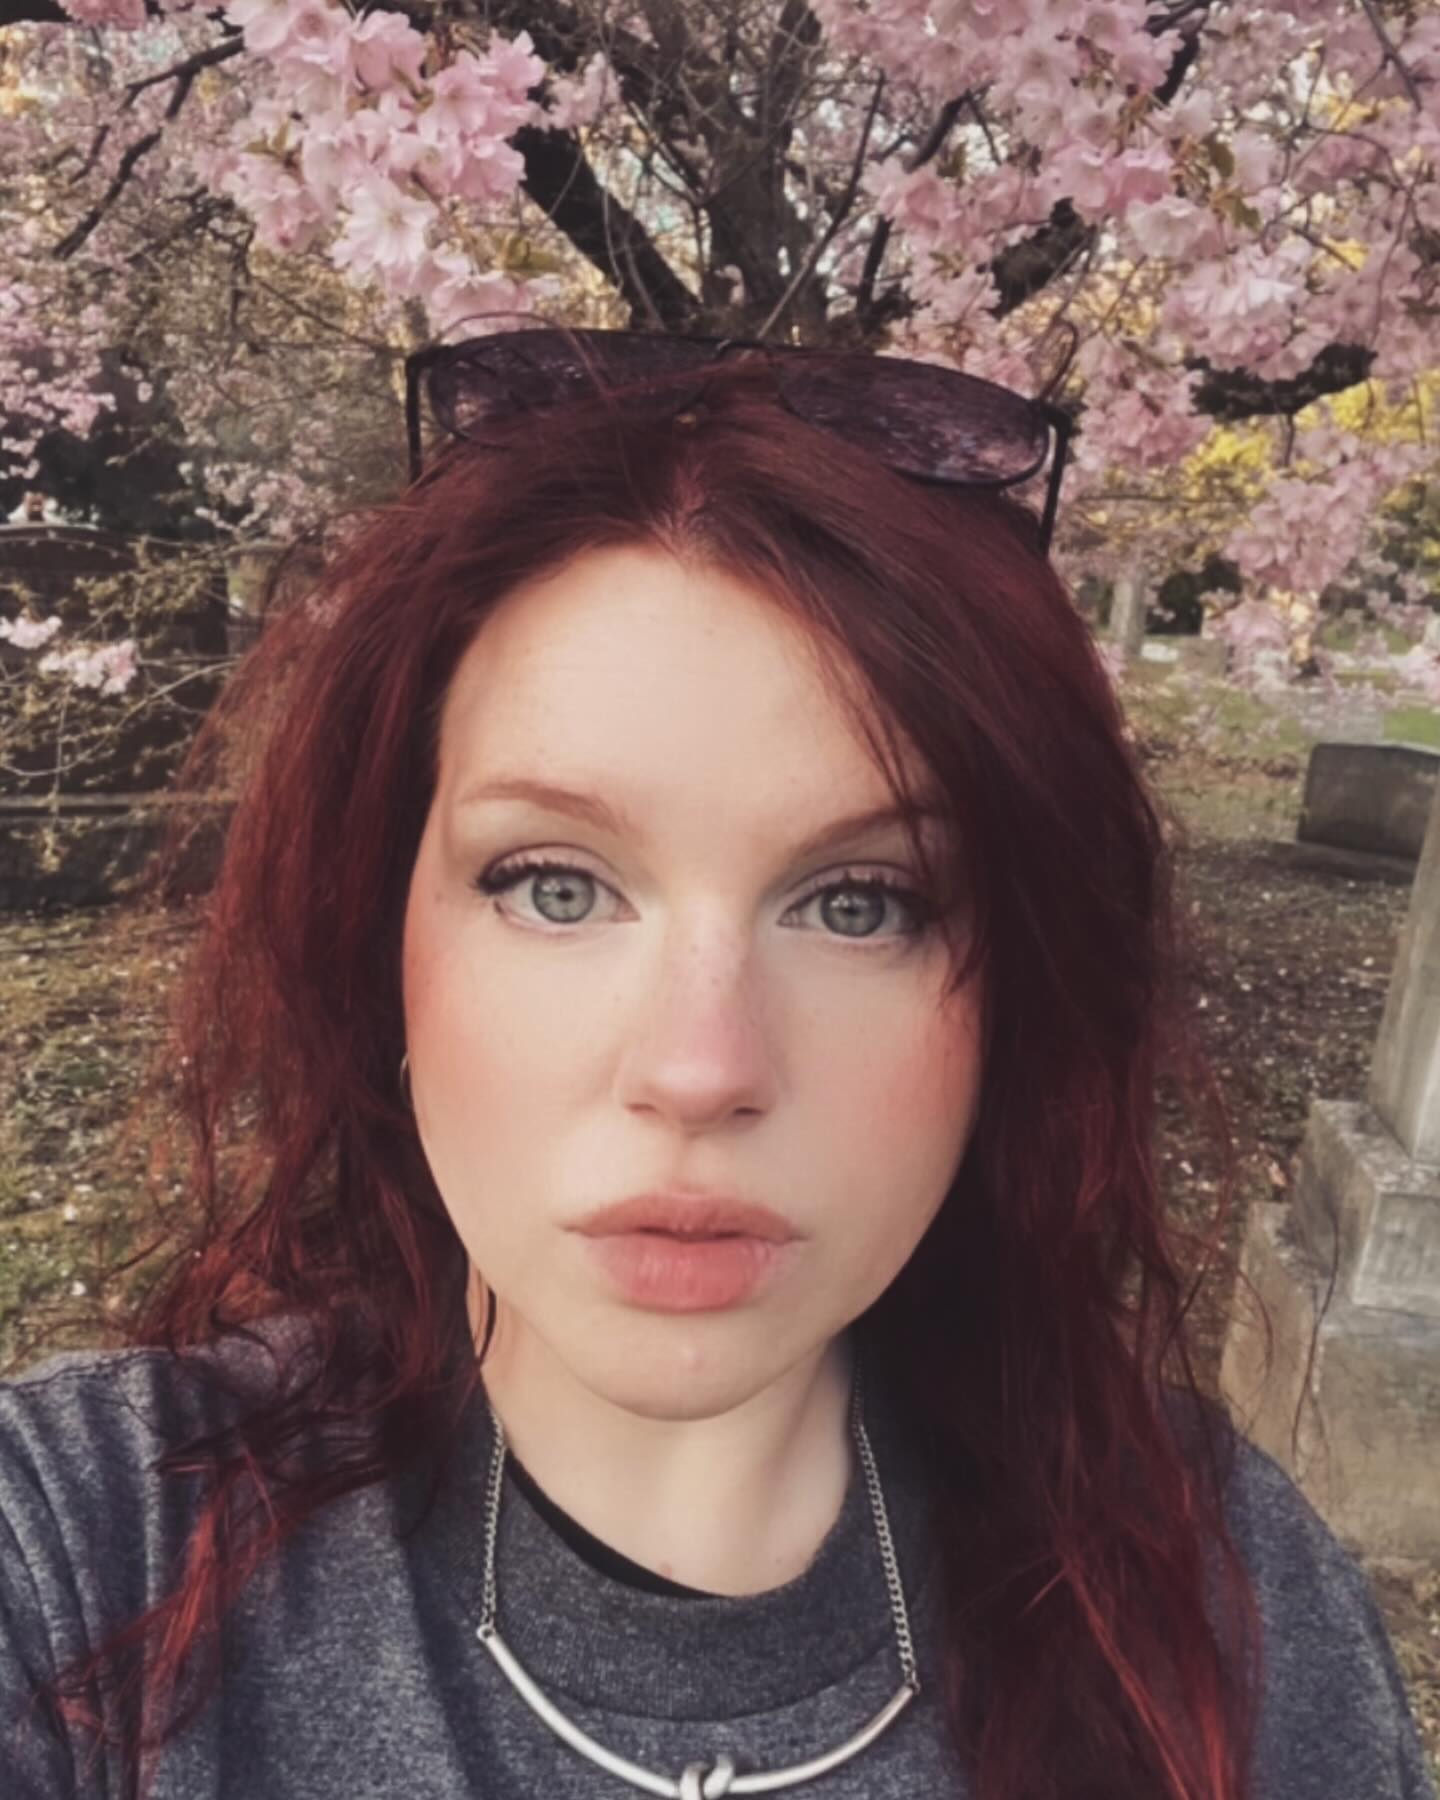 Springtime strolls under Toronto’s cherry blossom canopy 🌸 The cold made my nose match 💗 Where’s your favorite spot to admire the blooms? 
-
-
-
 #Toronto #torontocherryblossoms #CherryBlossoms #SpringVibes #redhead #redhairdontcare #redhair #redheadsdoitbetter #sakura